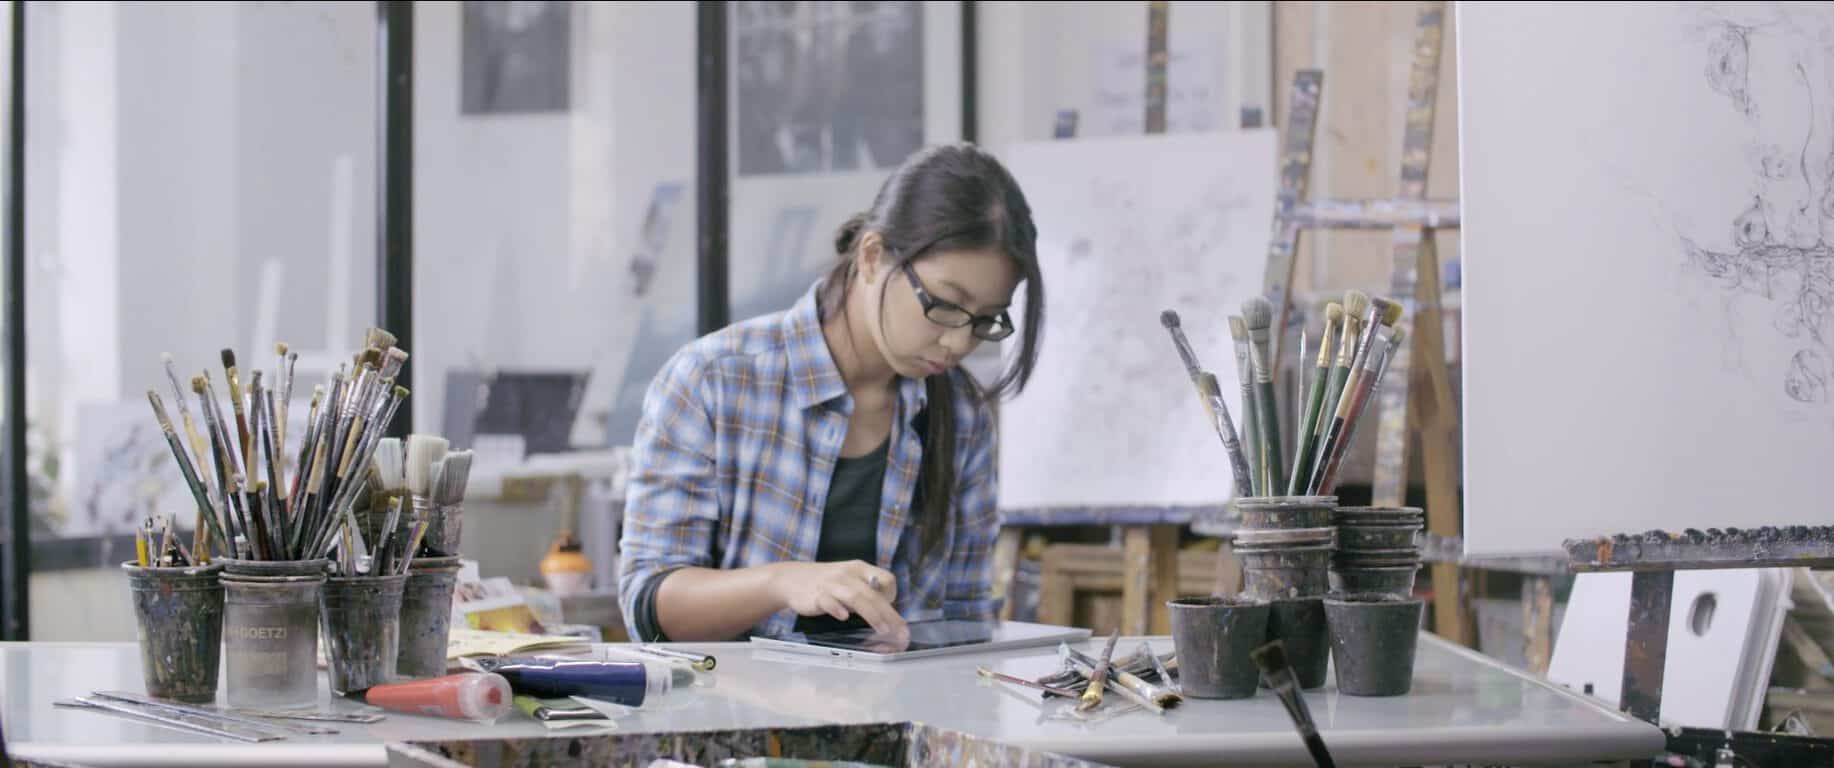 Microsoft surface pro 4 used to make art on hong kong rooftops - onmsft. Com - january 21, 2016